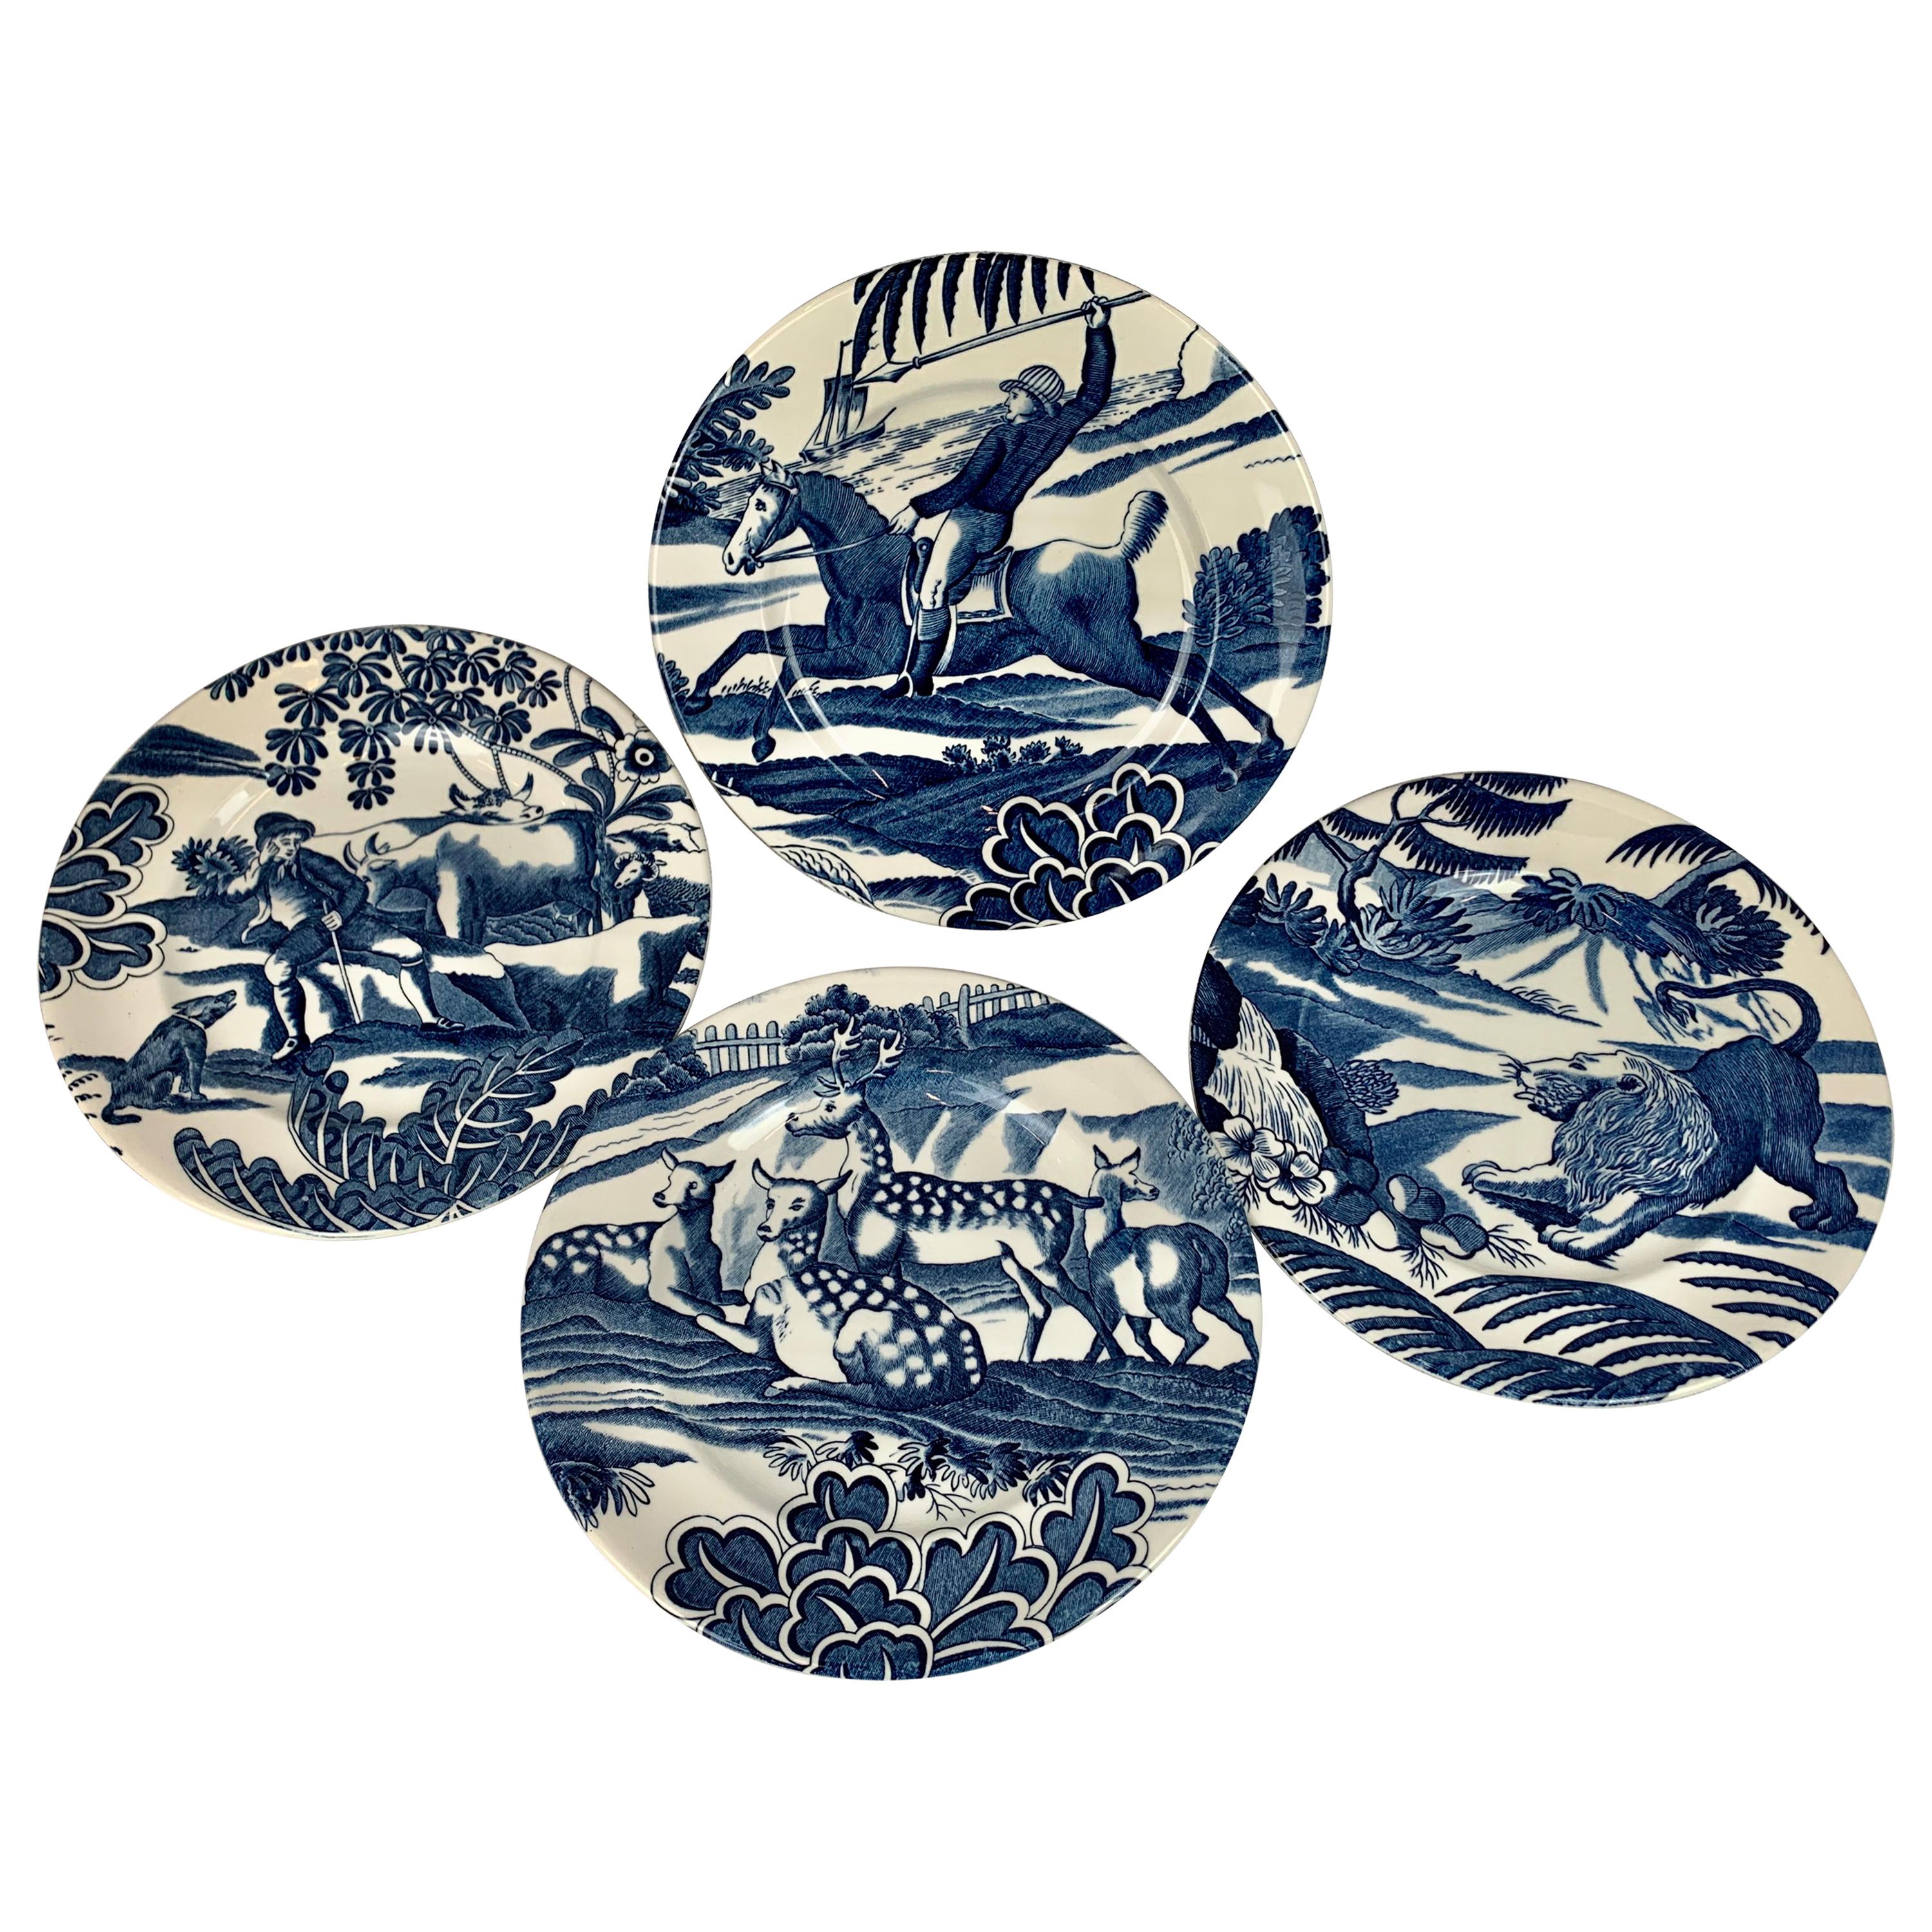  Menagerie Plates by Tiffany in Cobalt Blue-Set of 8